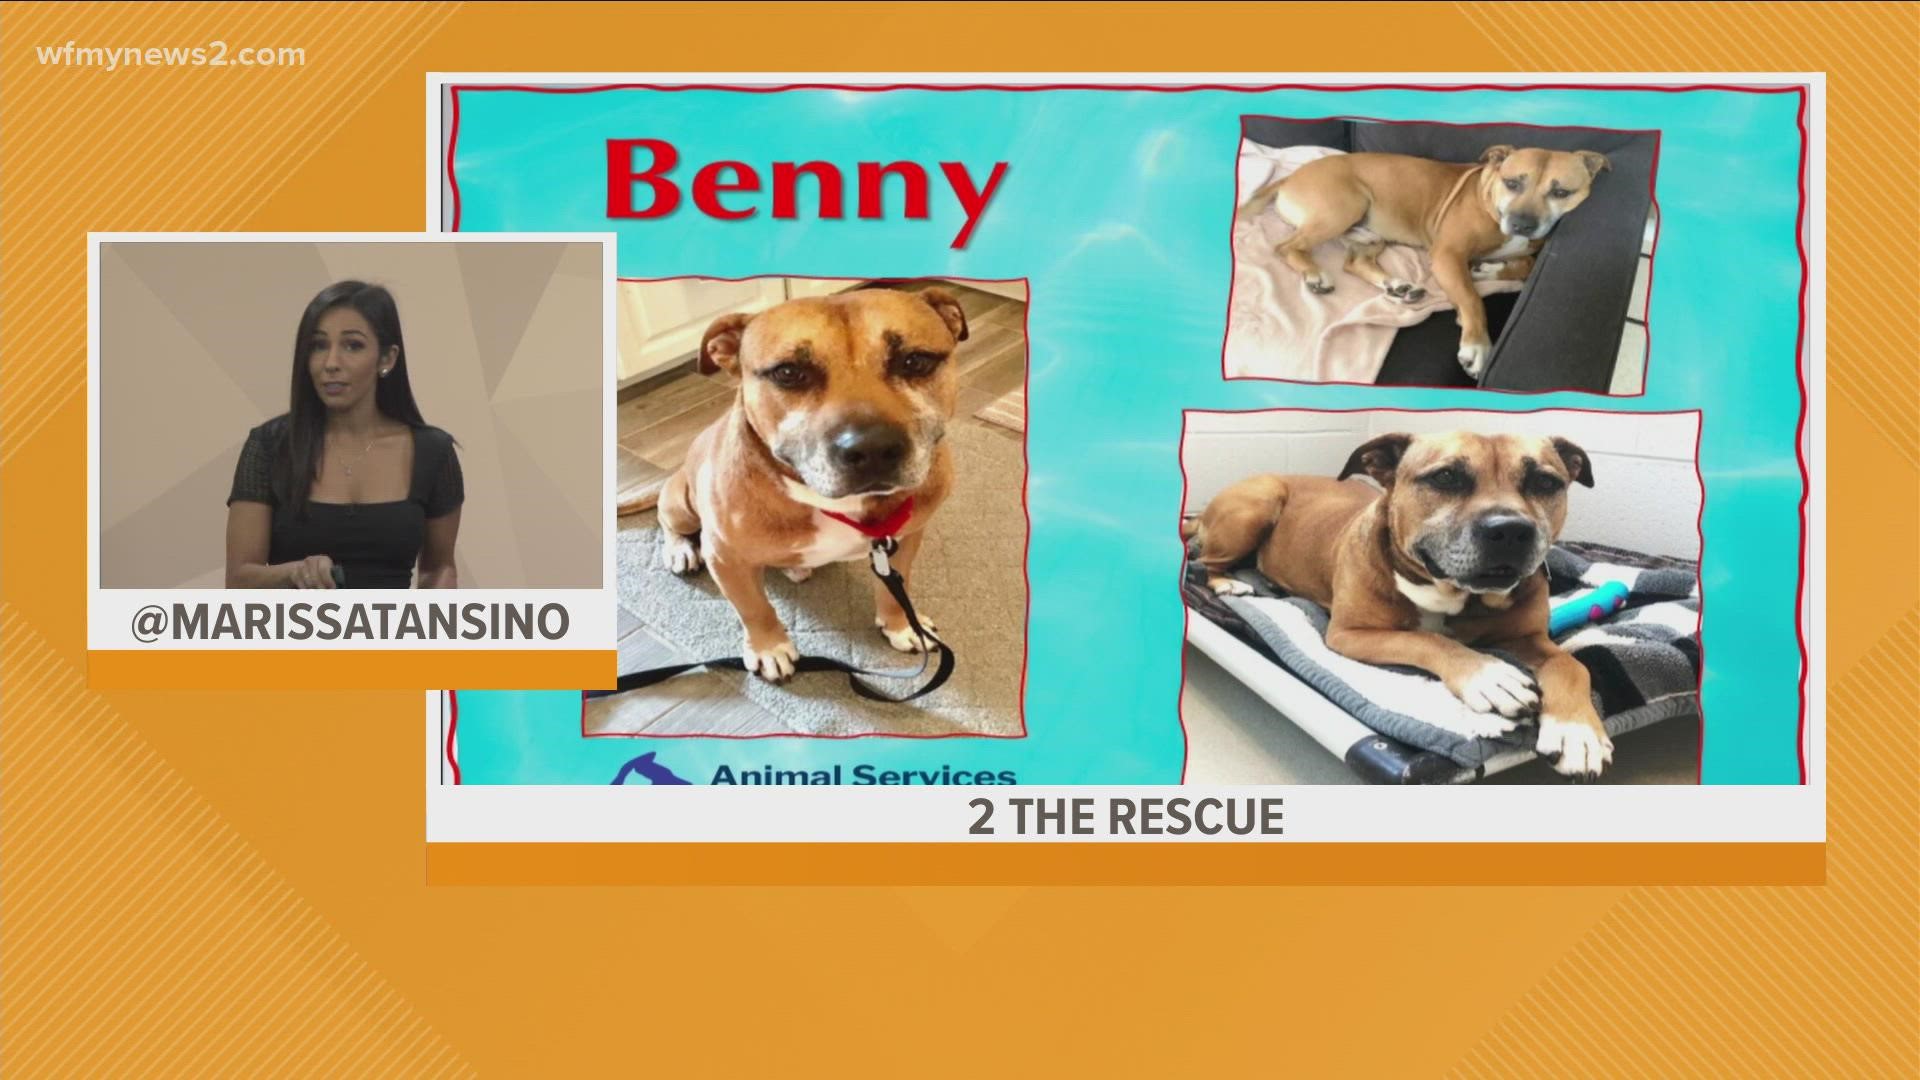 Looking for a pup whose zoomies day are gone? Benny is a Netflix and chill kind of pup!